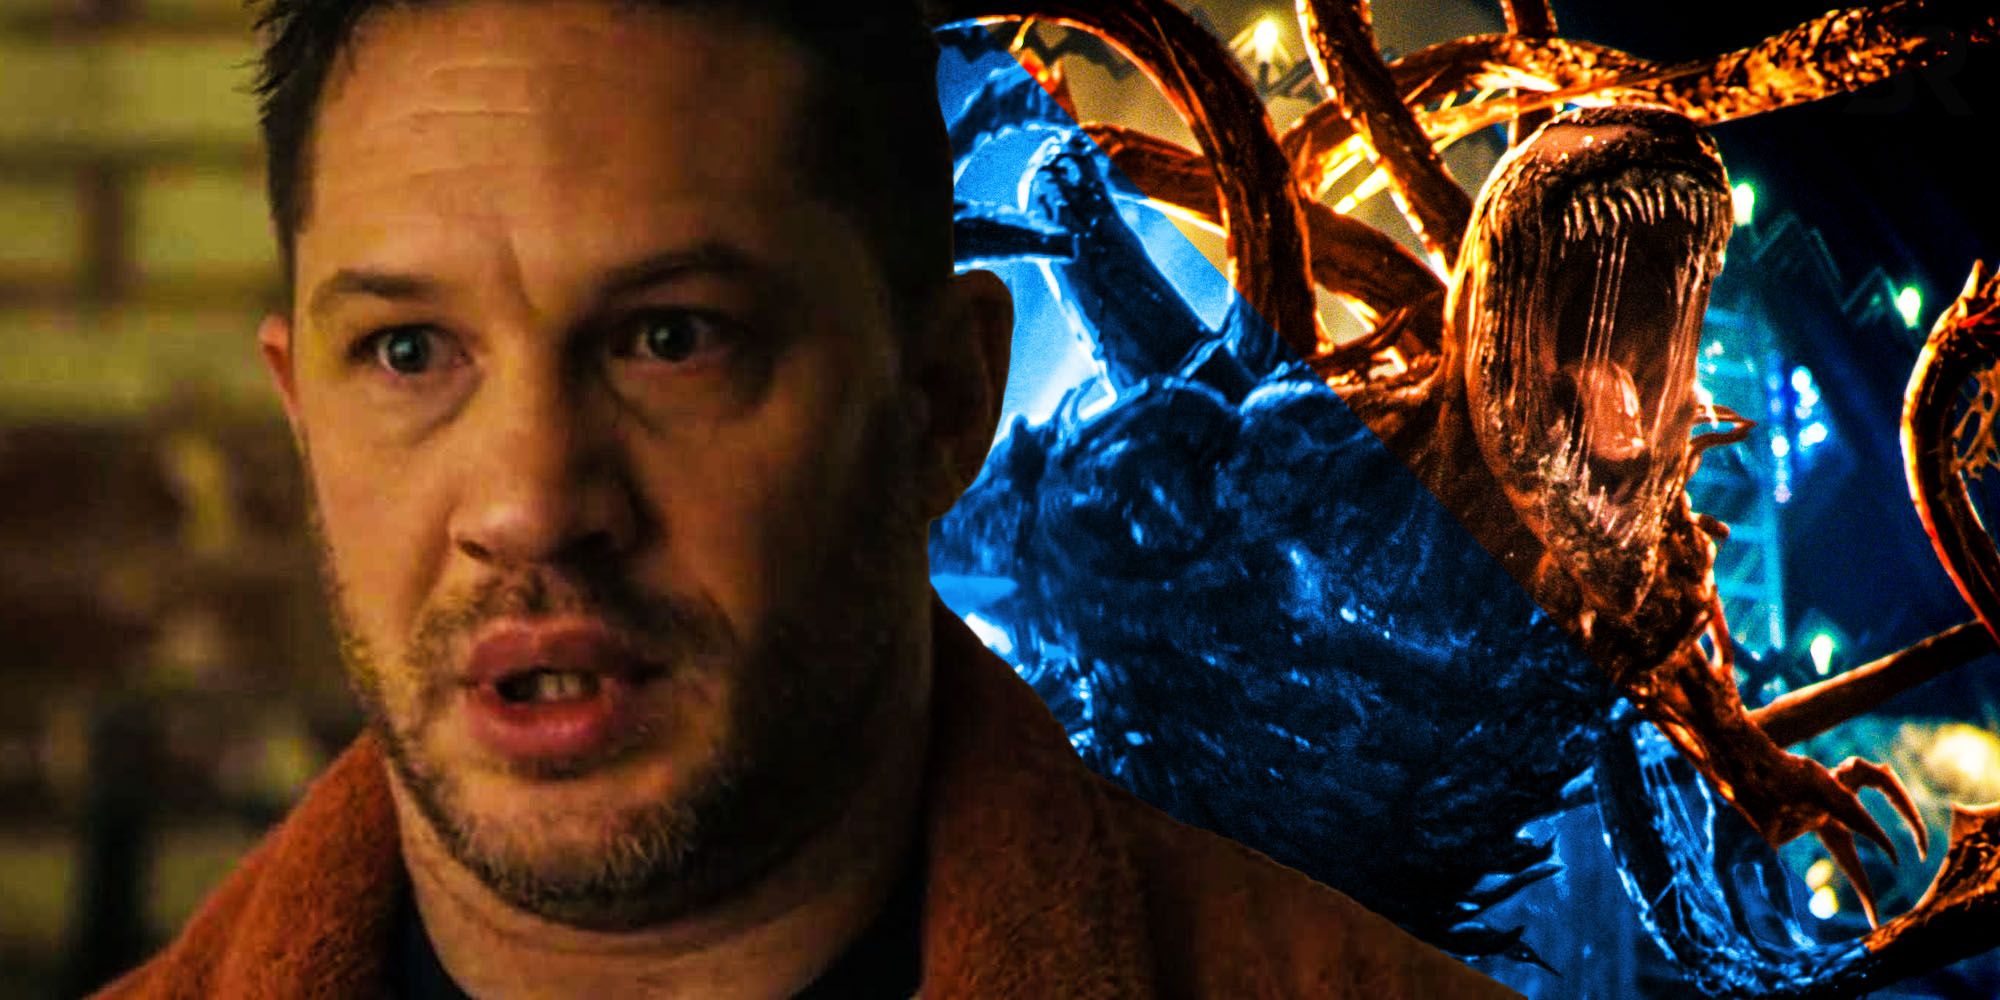 Eddie brock Venom there will be carnage trailer avoids mistakes the first movie teaser made